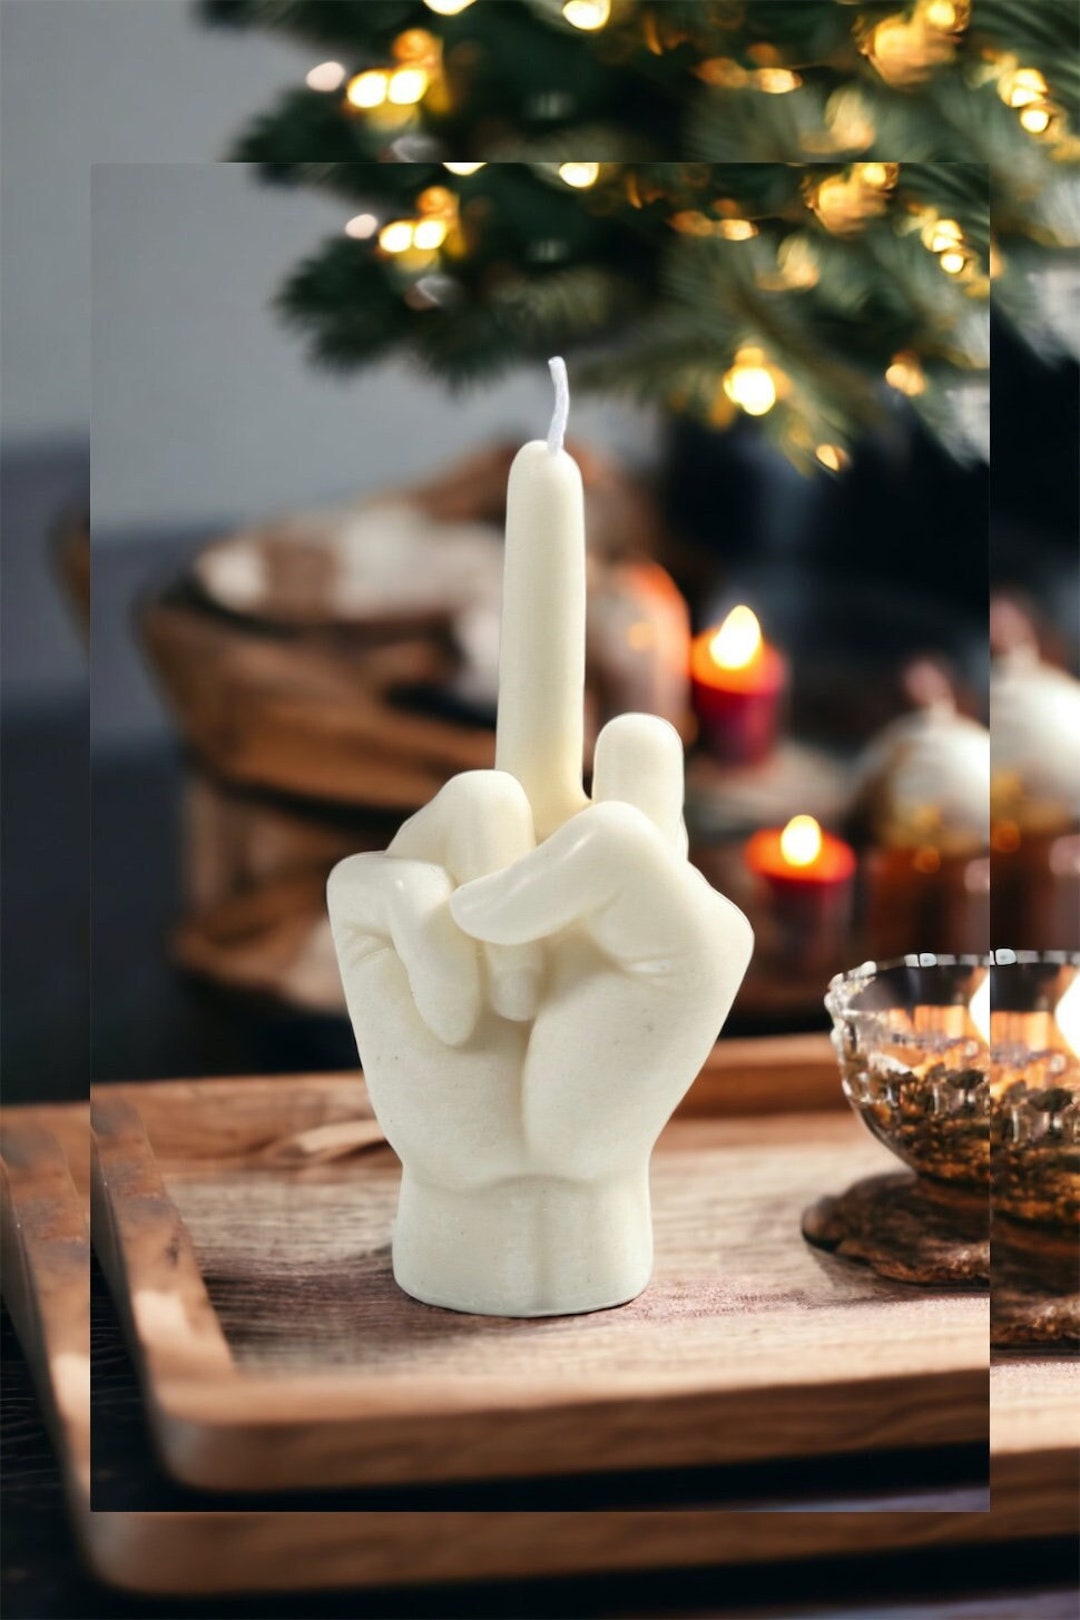  Hand Shaped Candles Middle Finger Scented Candle Aromatherapy  Hand Gesture Candles Funky Room Decor for House Bedroom Supplies (Middle  Finger) : Home & Kitchen